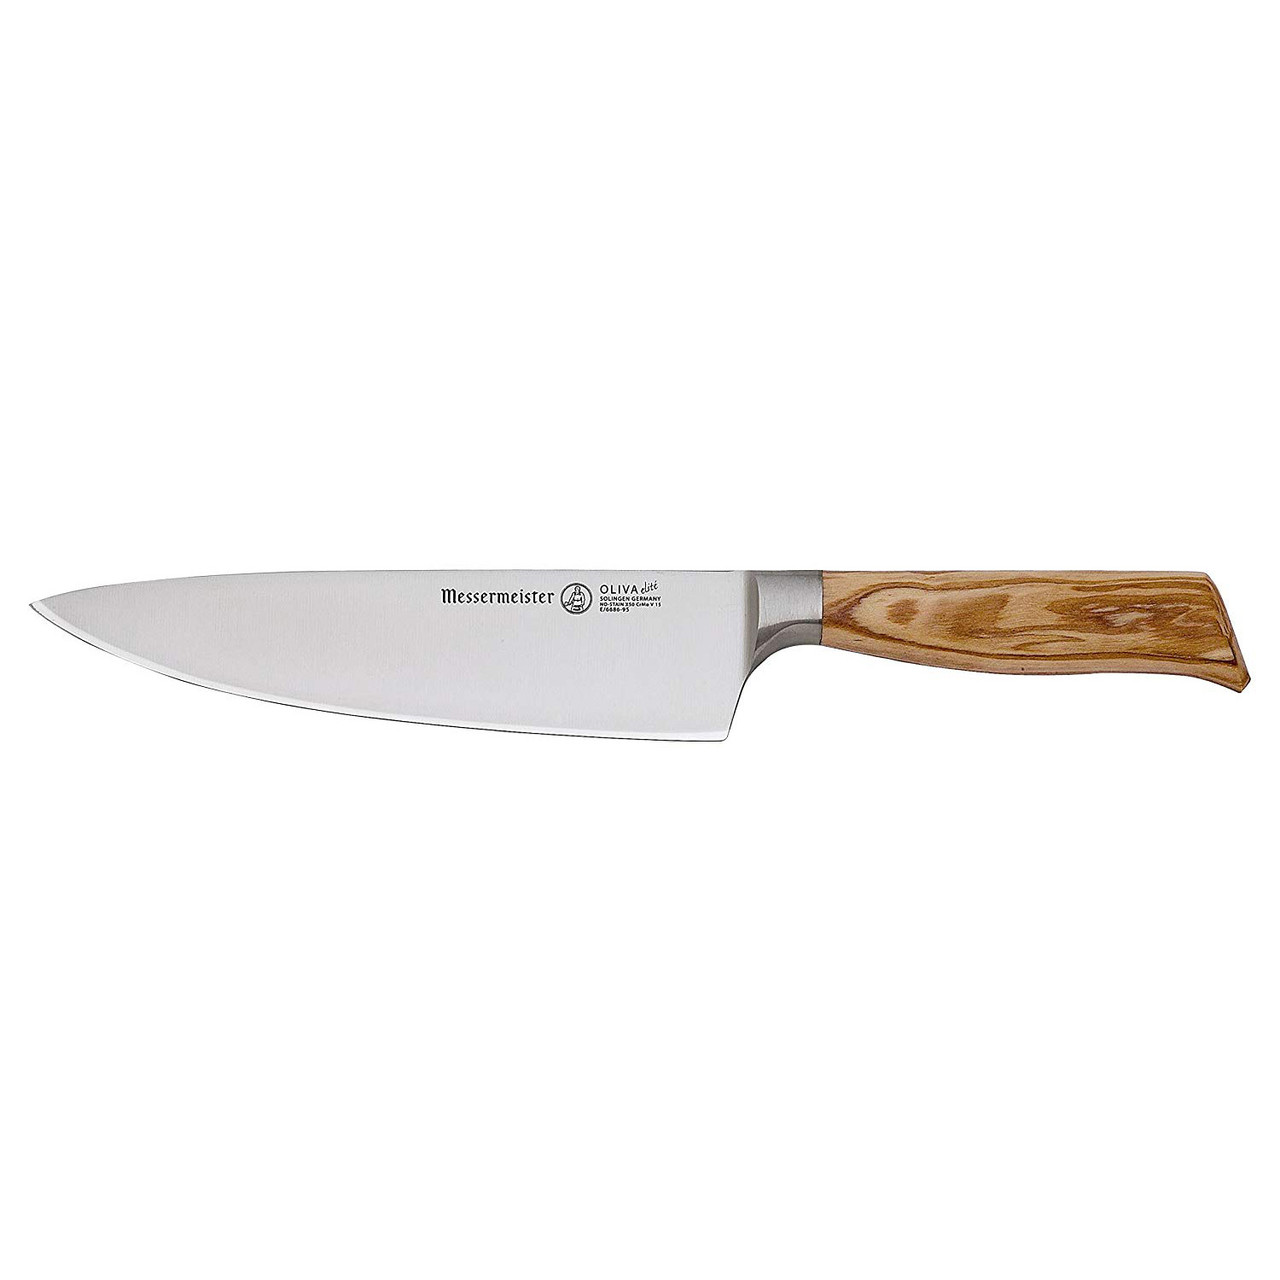 https://cdn11.bigcommerce.com/s-hccytny0od/images/stencil/1280x1280/products/2692/9513/messermeister-oliva-elite-chefs-knife-8in__76494.1593464161.jpg?c=2?imbypass=on